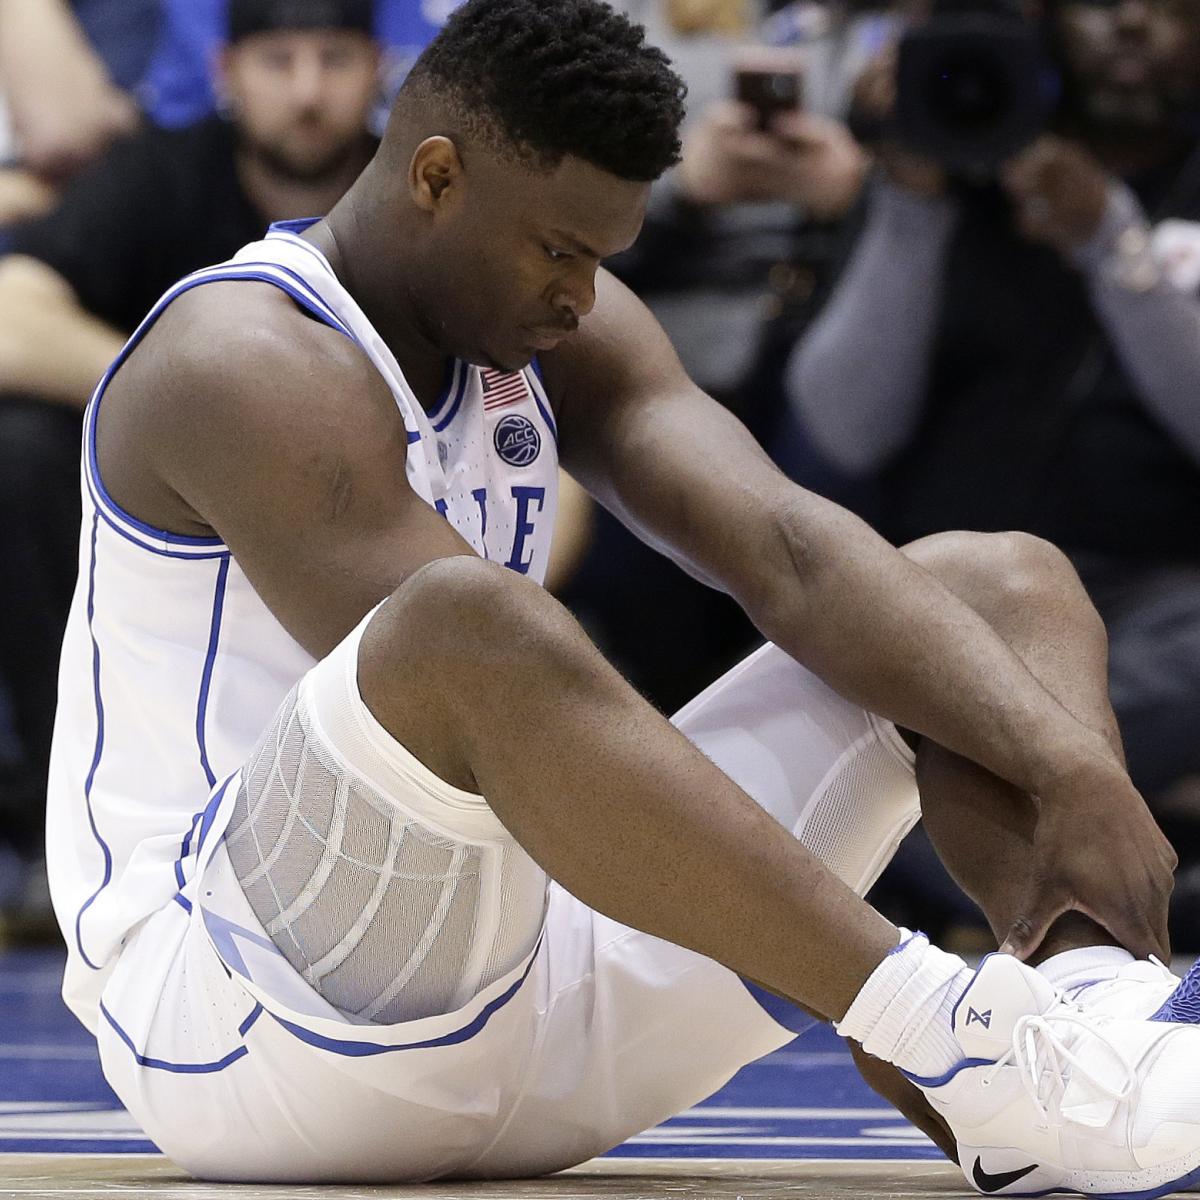 Skechers Takes Shots at Nike for Zion Williamson's Ripped Shoe with IG, NYT Ads ...1200 x 1200